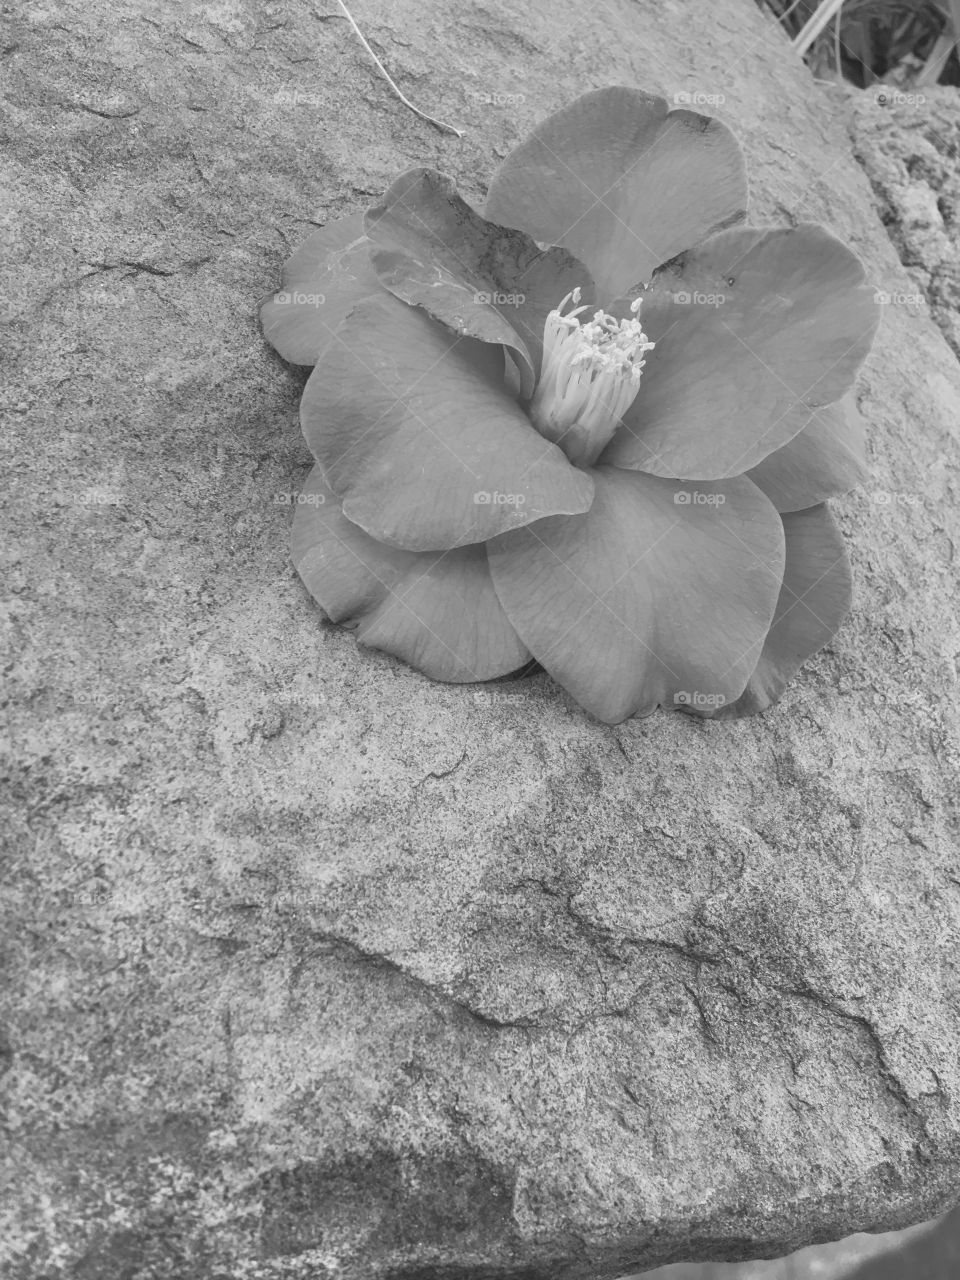 A pink flower under a black and white filter